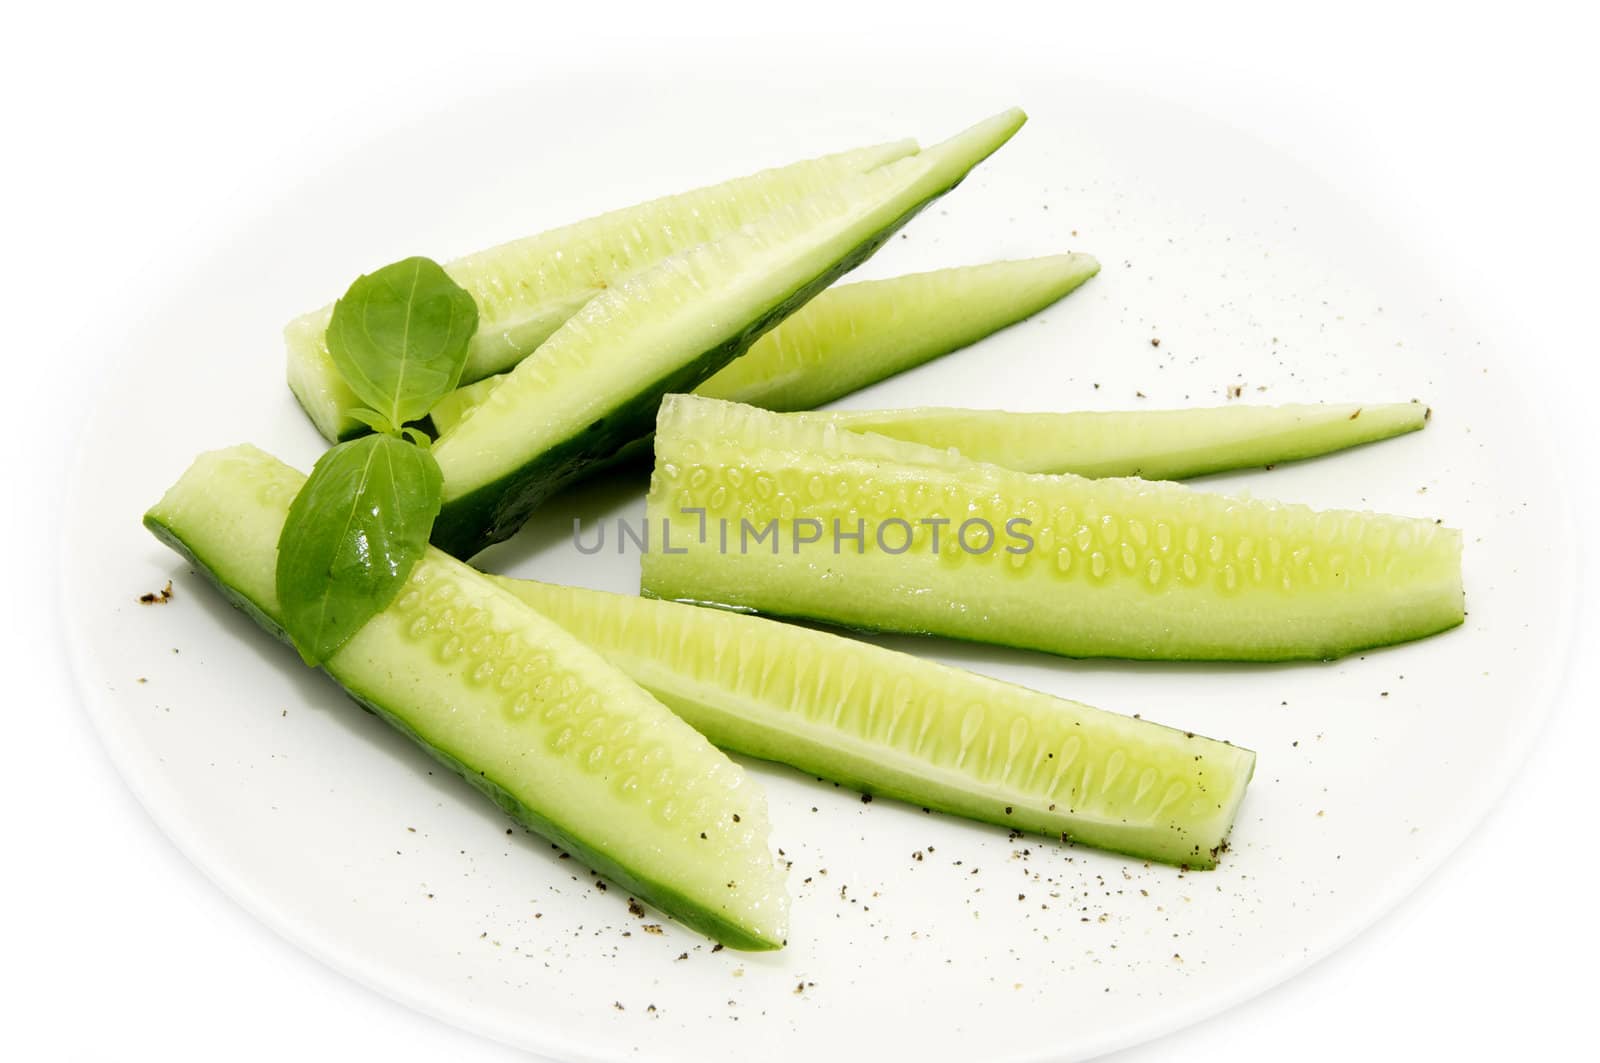 sliced cucumber on a plate on a white background